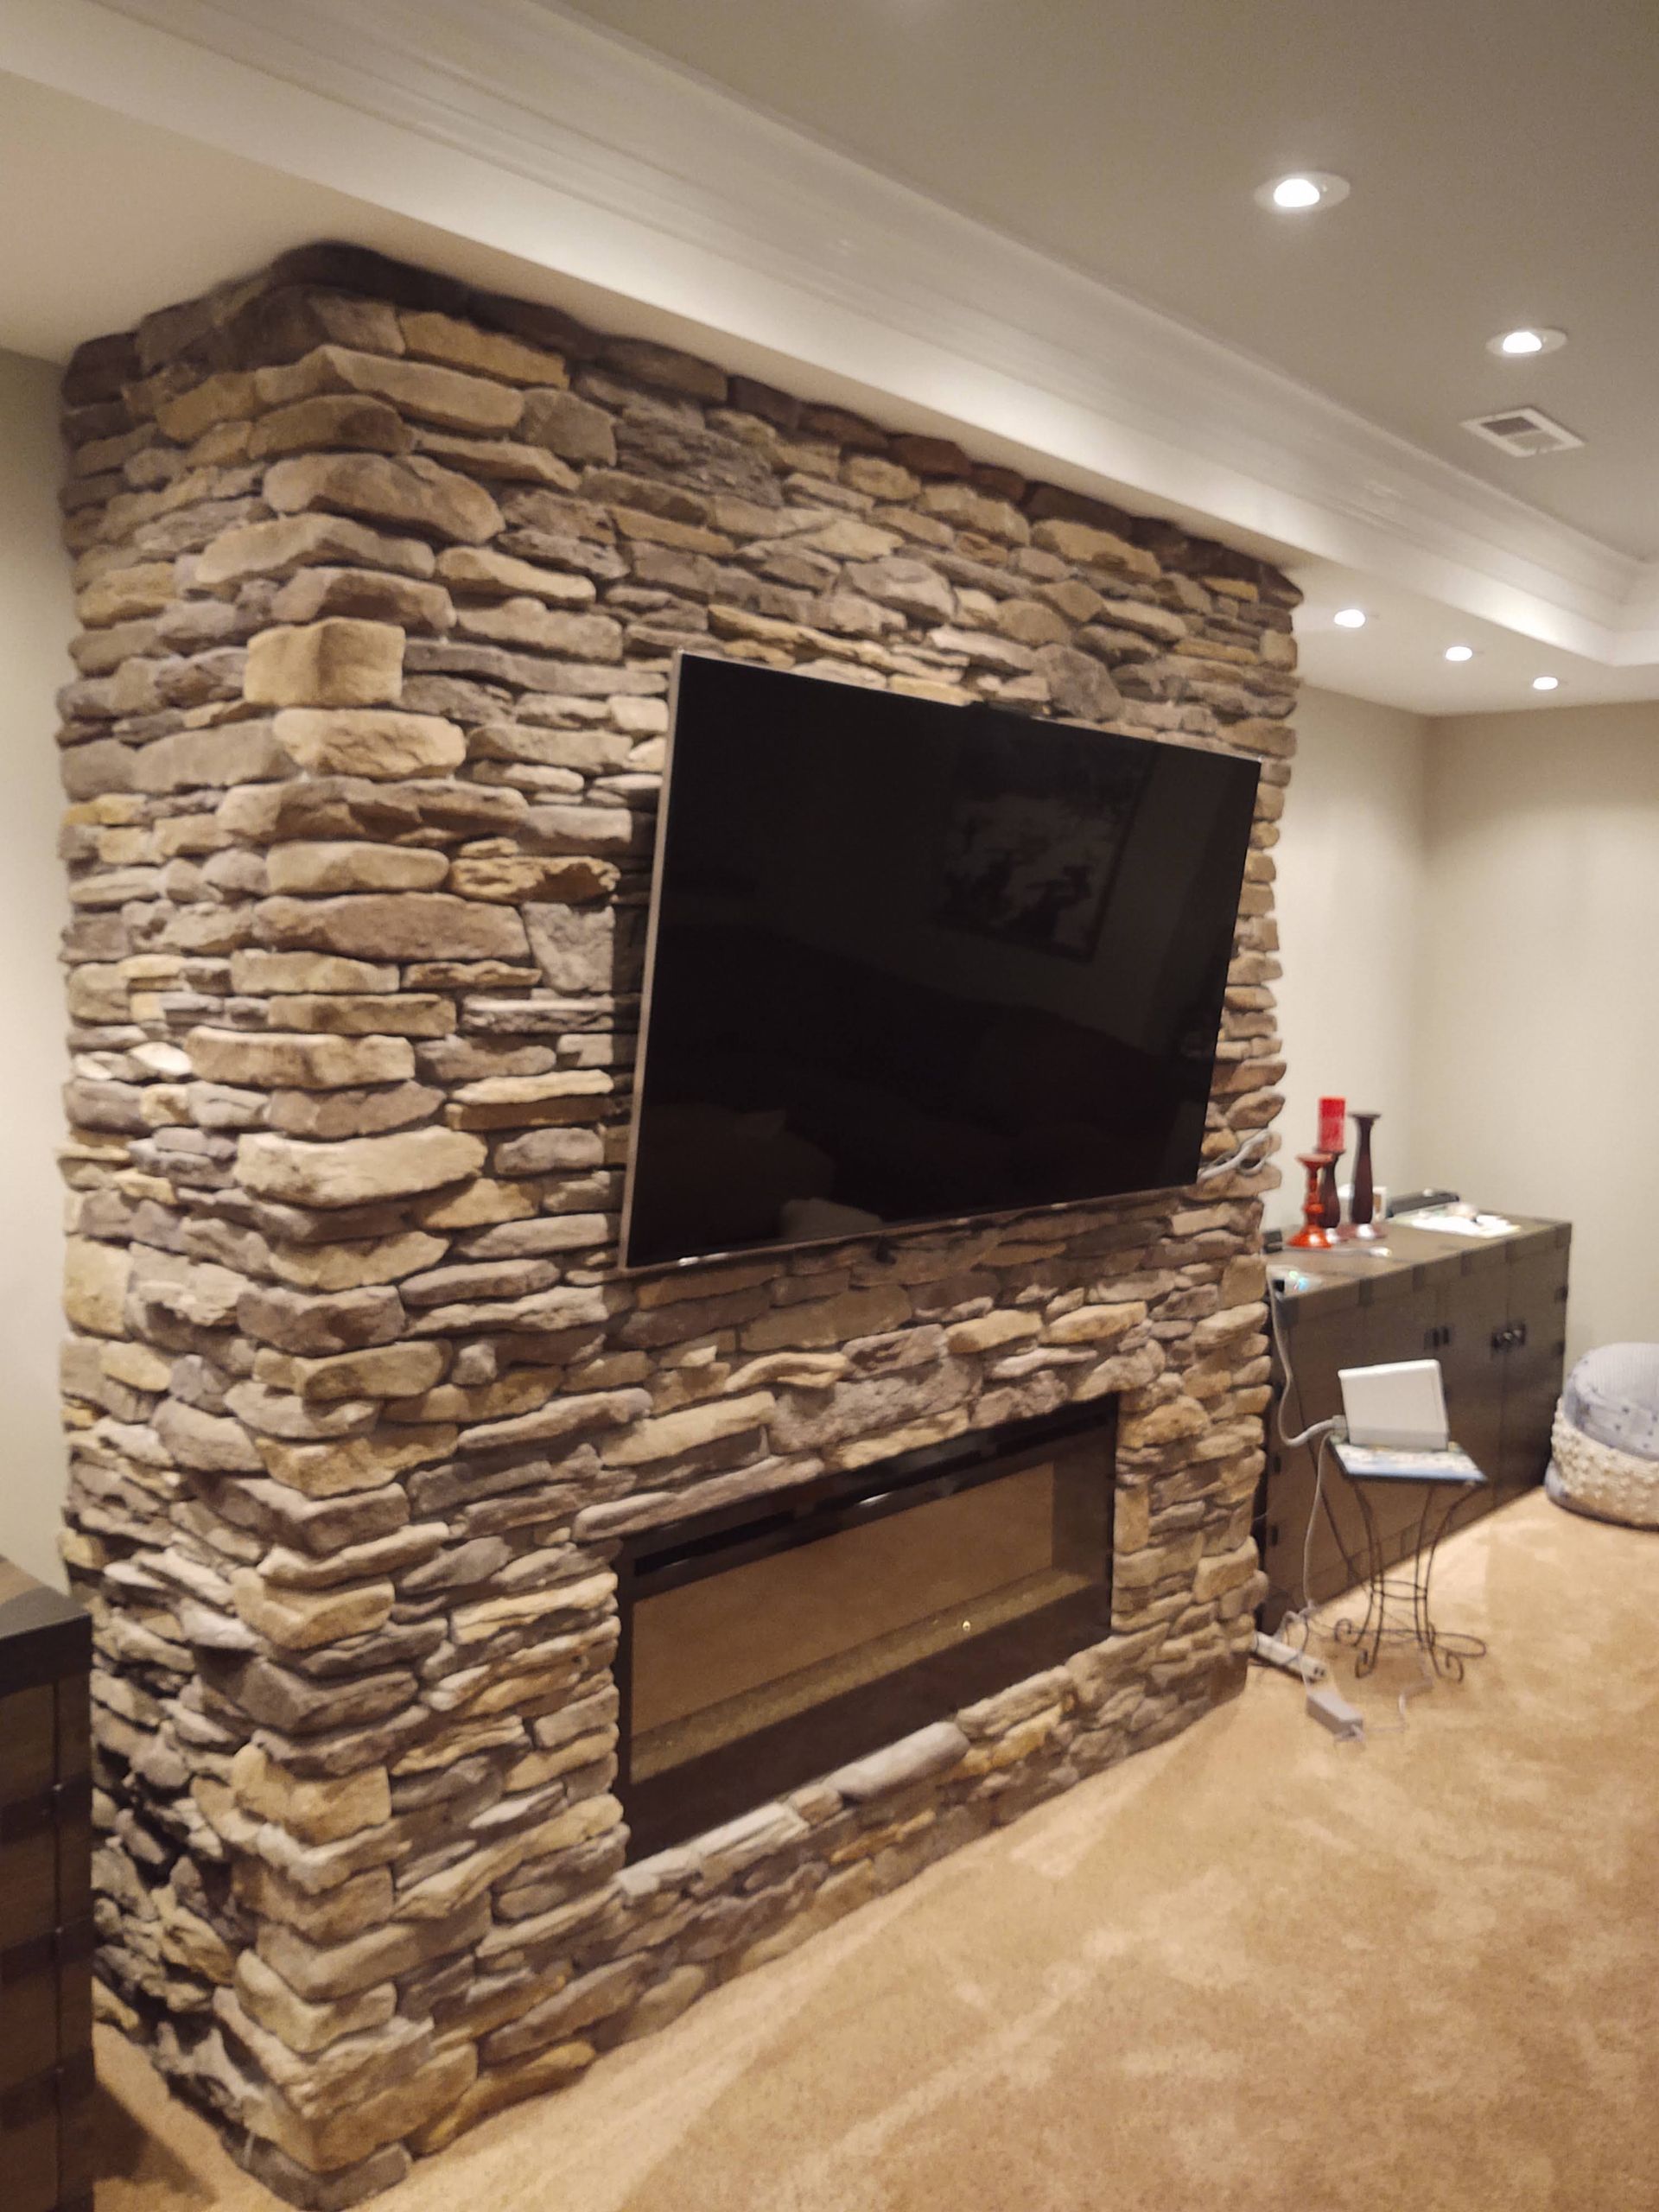 Fireplace — Modern Fireplace With Brick Wall in Lan ghorne, PA